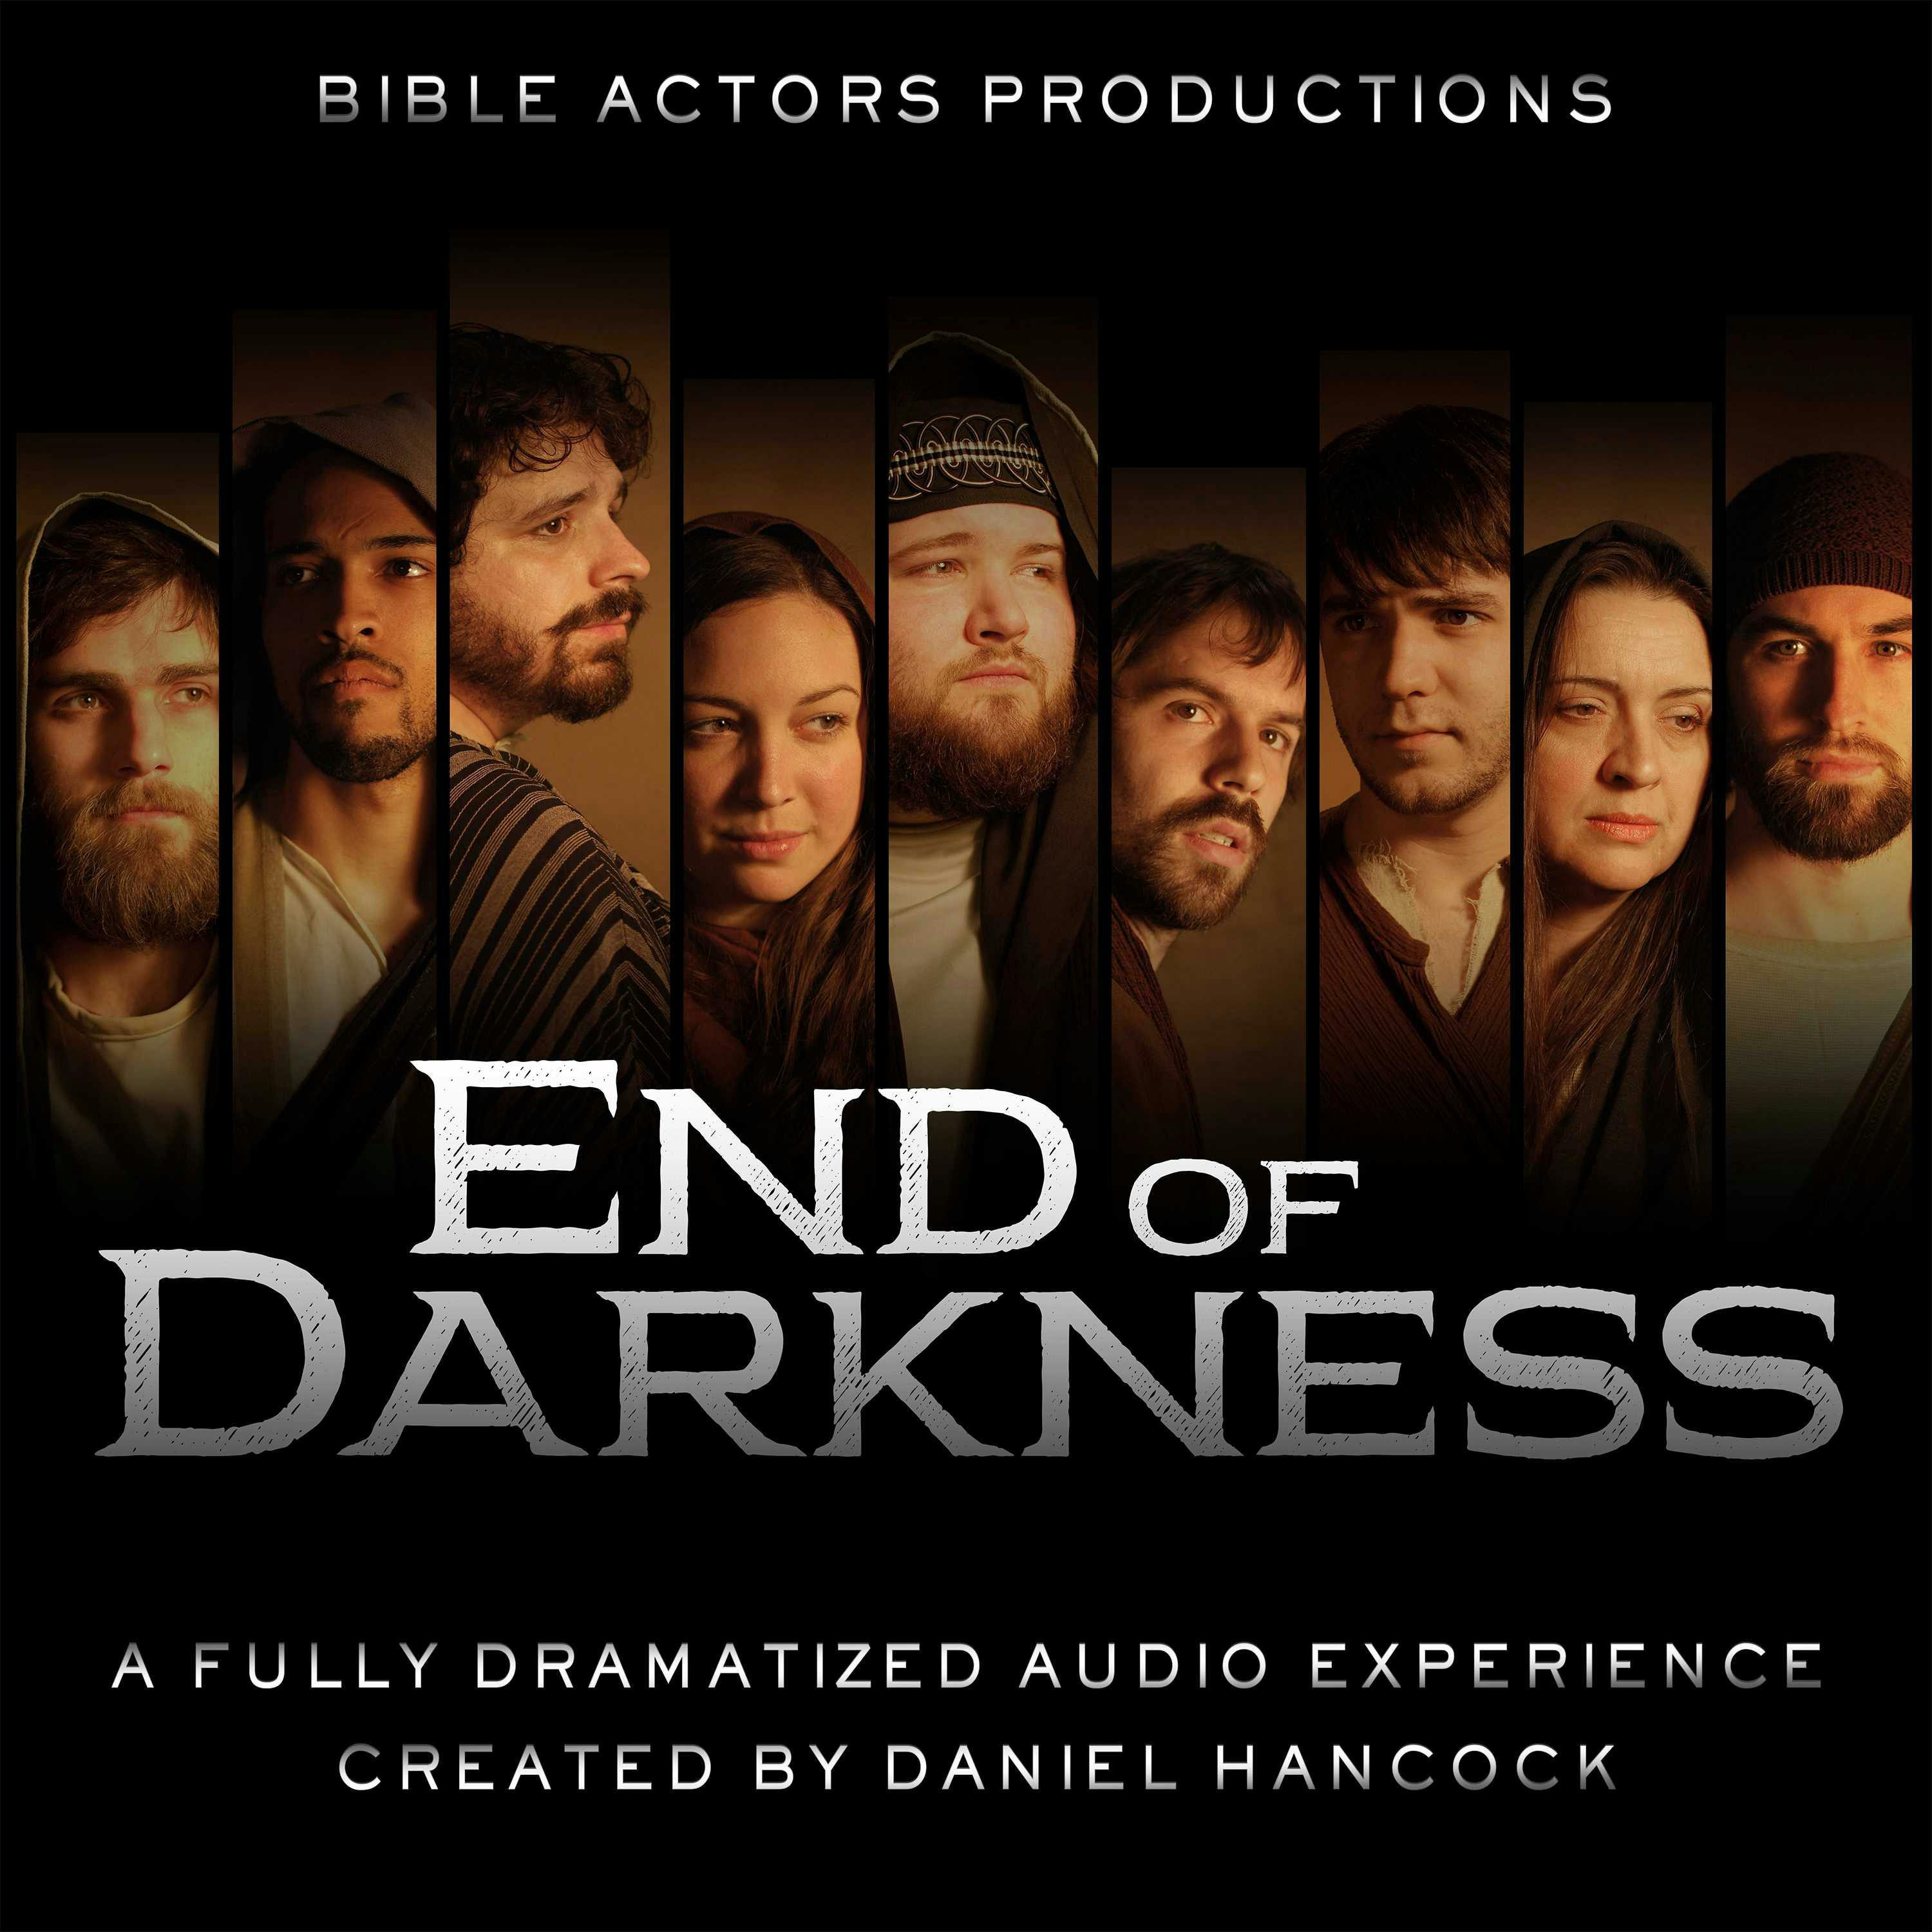 END OF DARKNESS - undefined